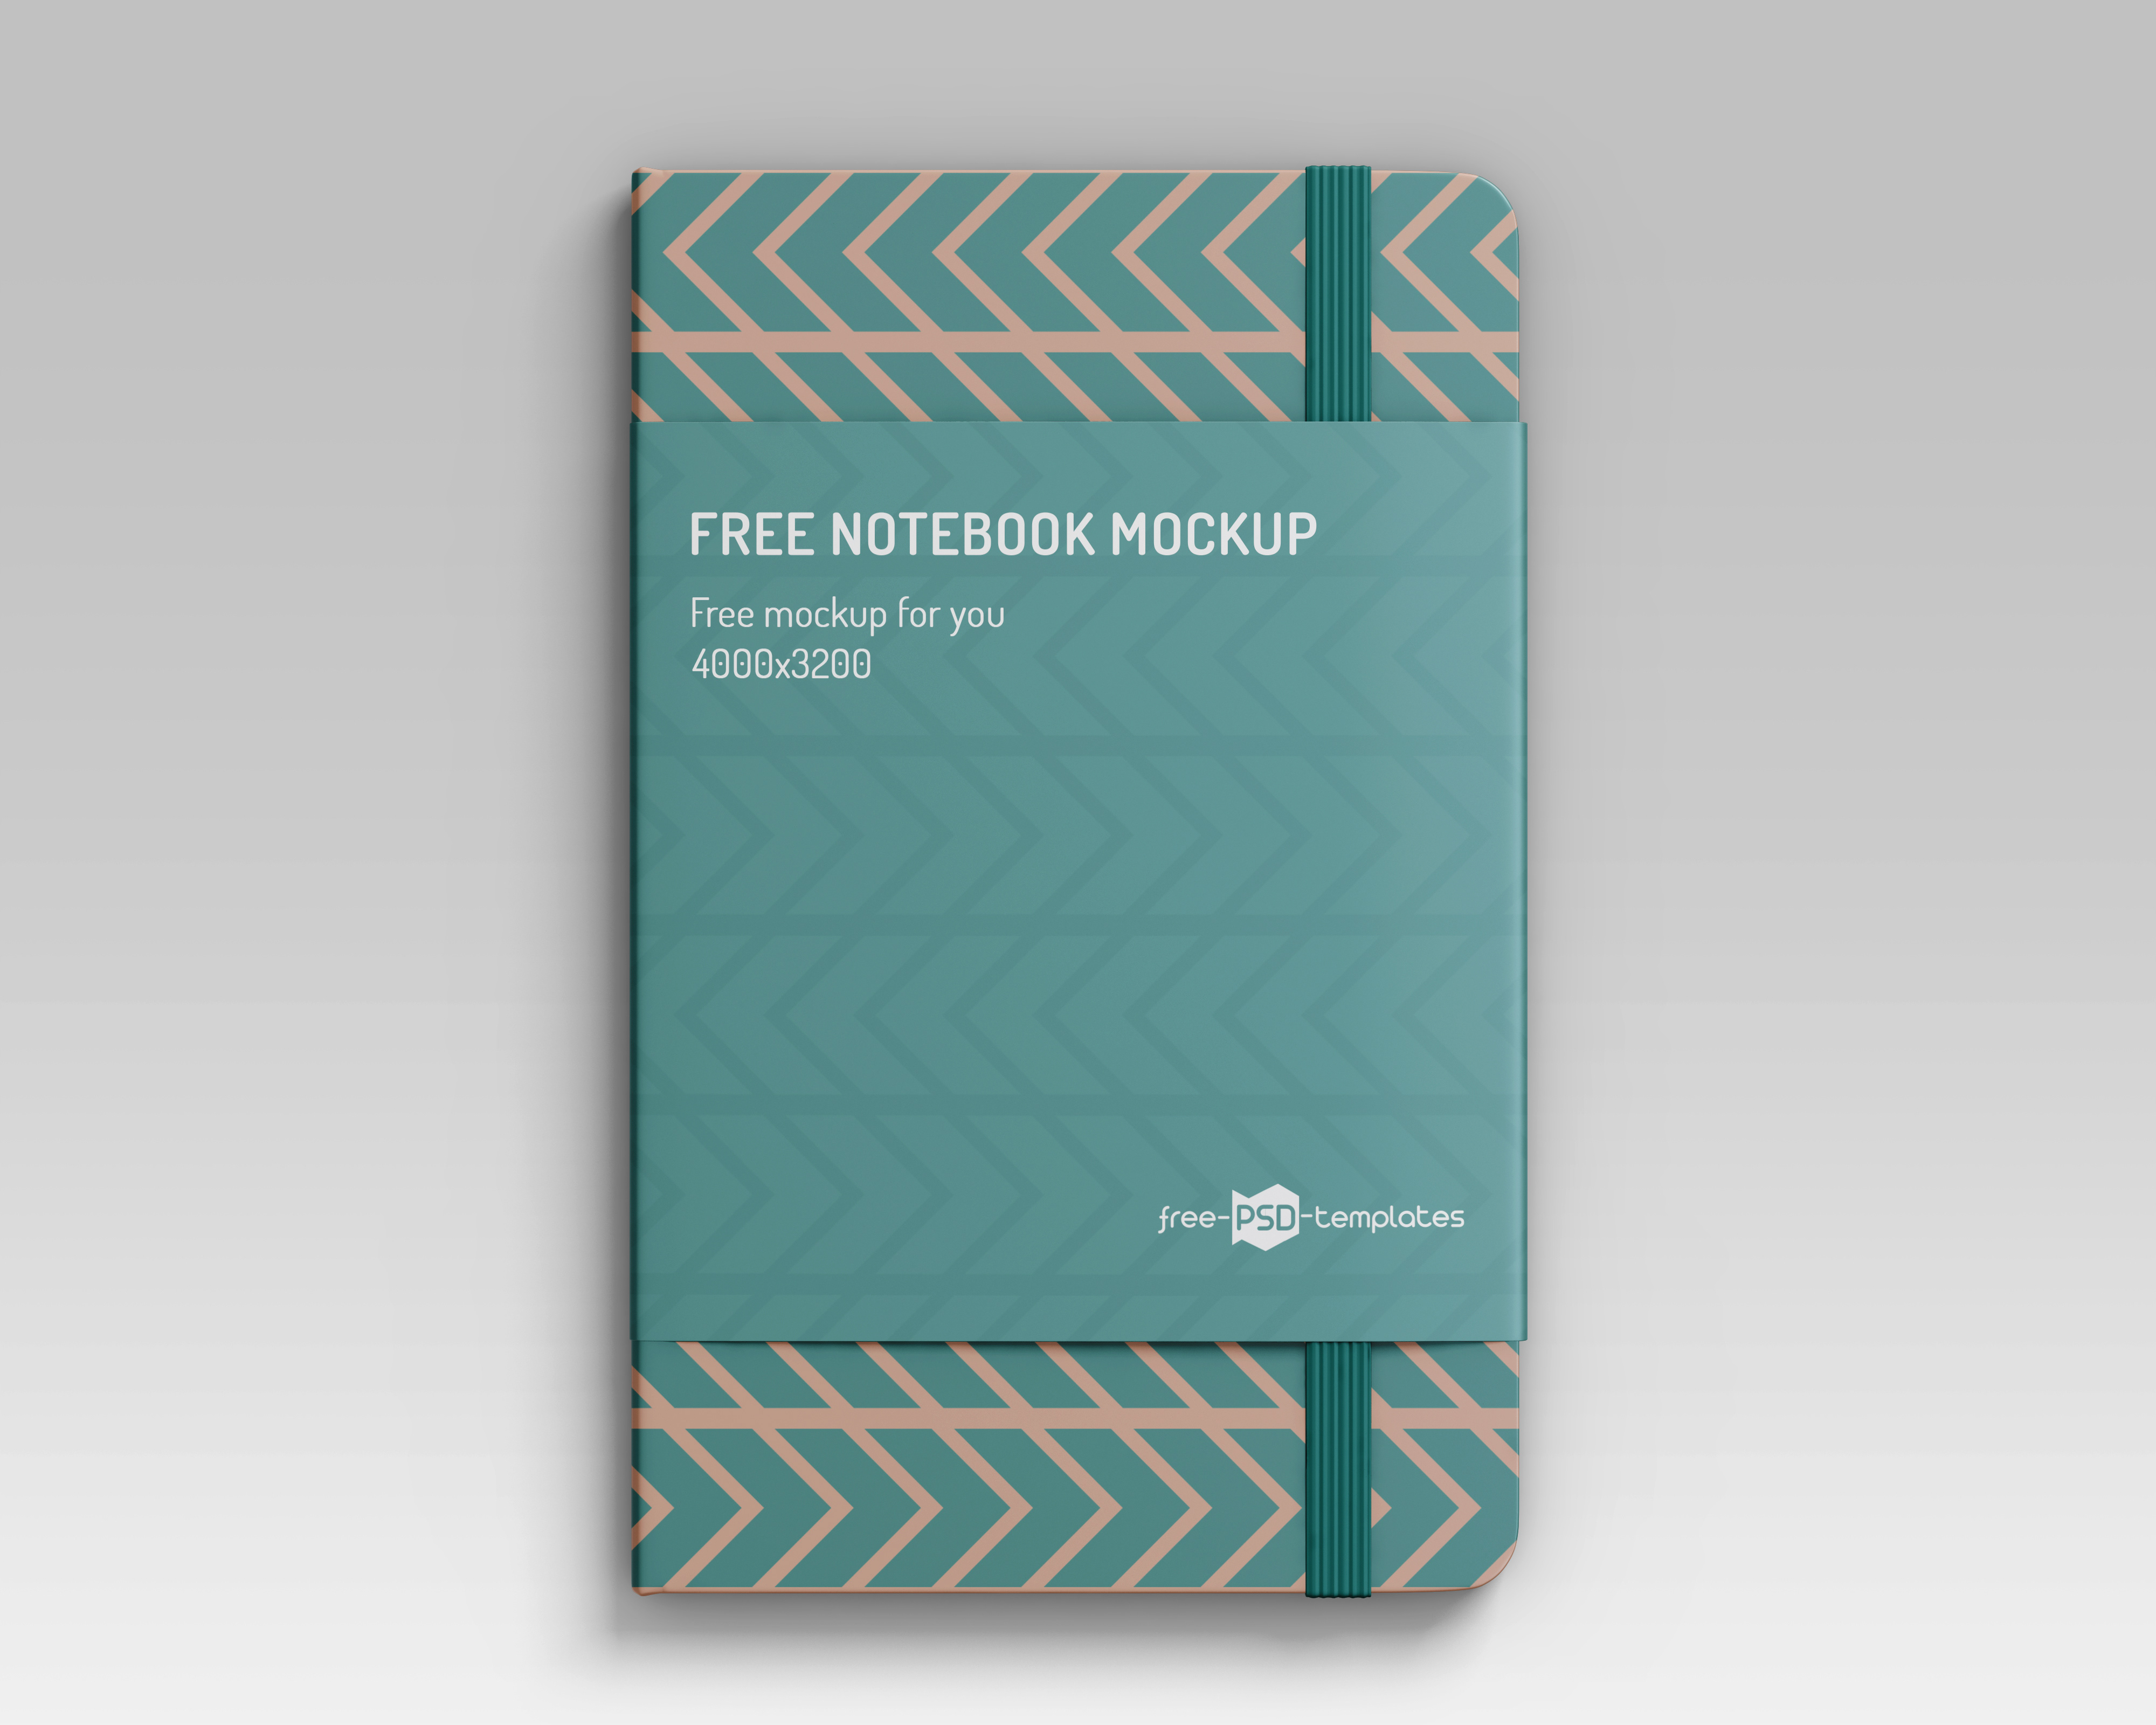 Download Notepad Mockup Projects Photos Videos Logos Illustrations And Branding On Behance